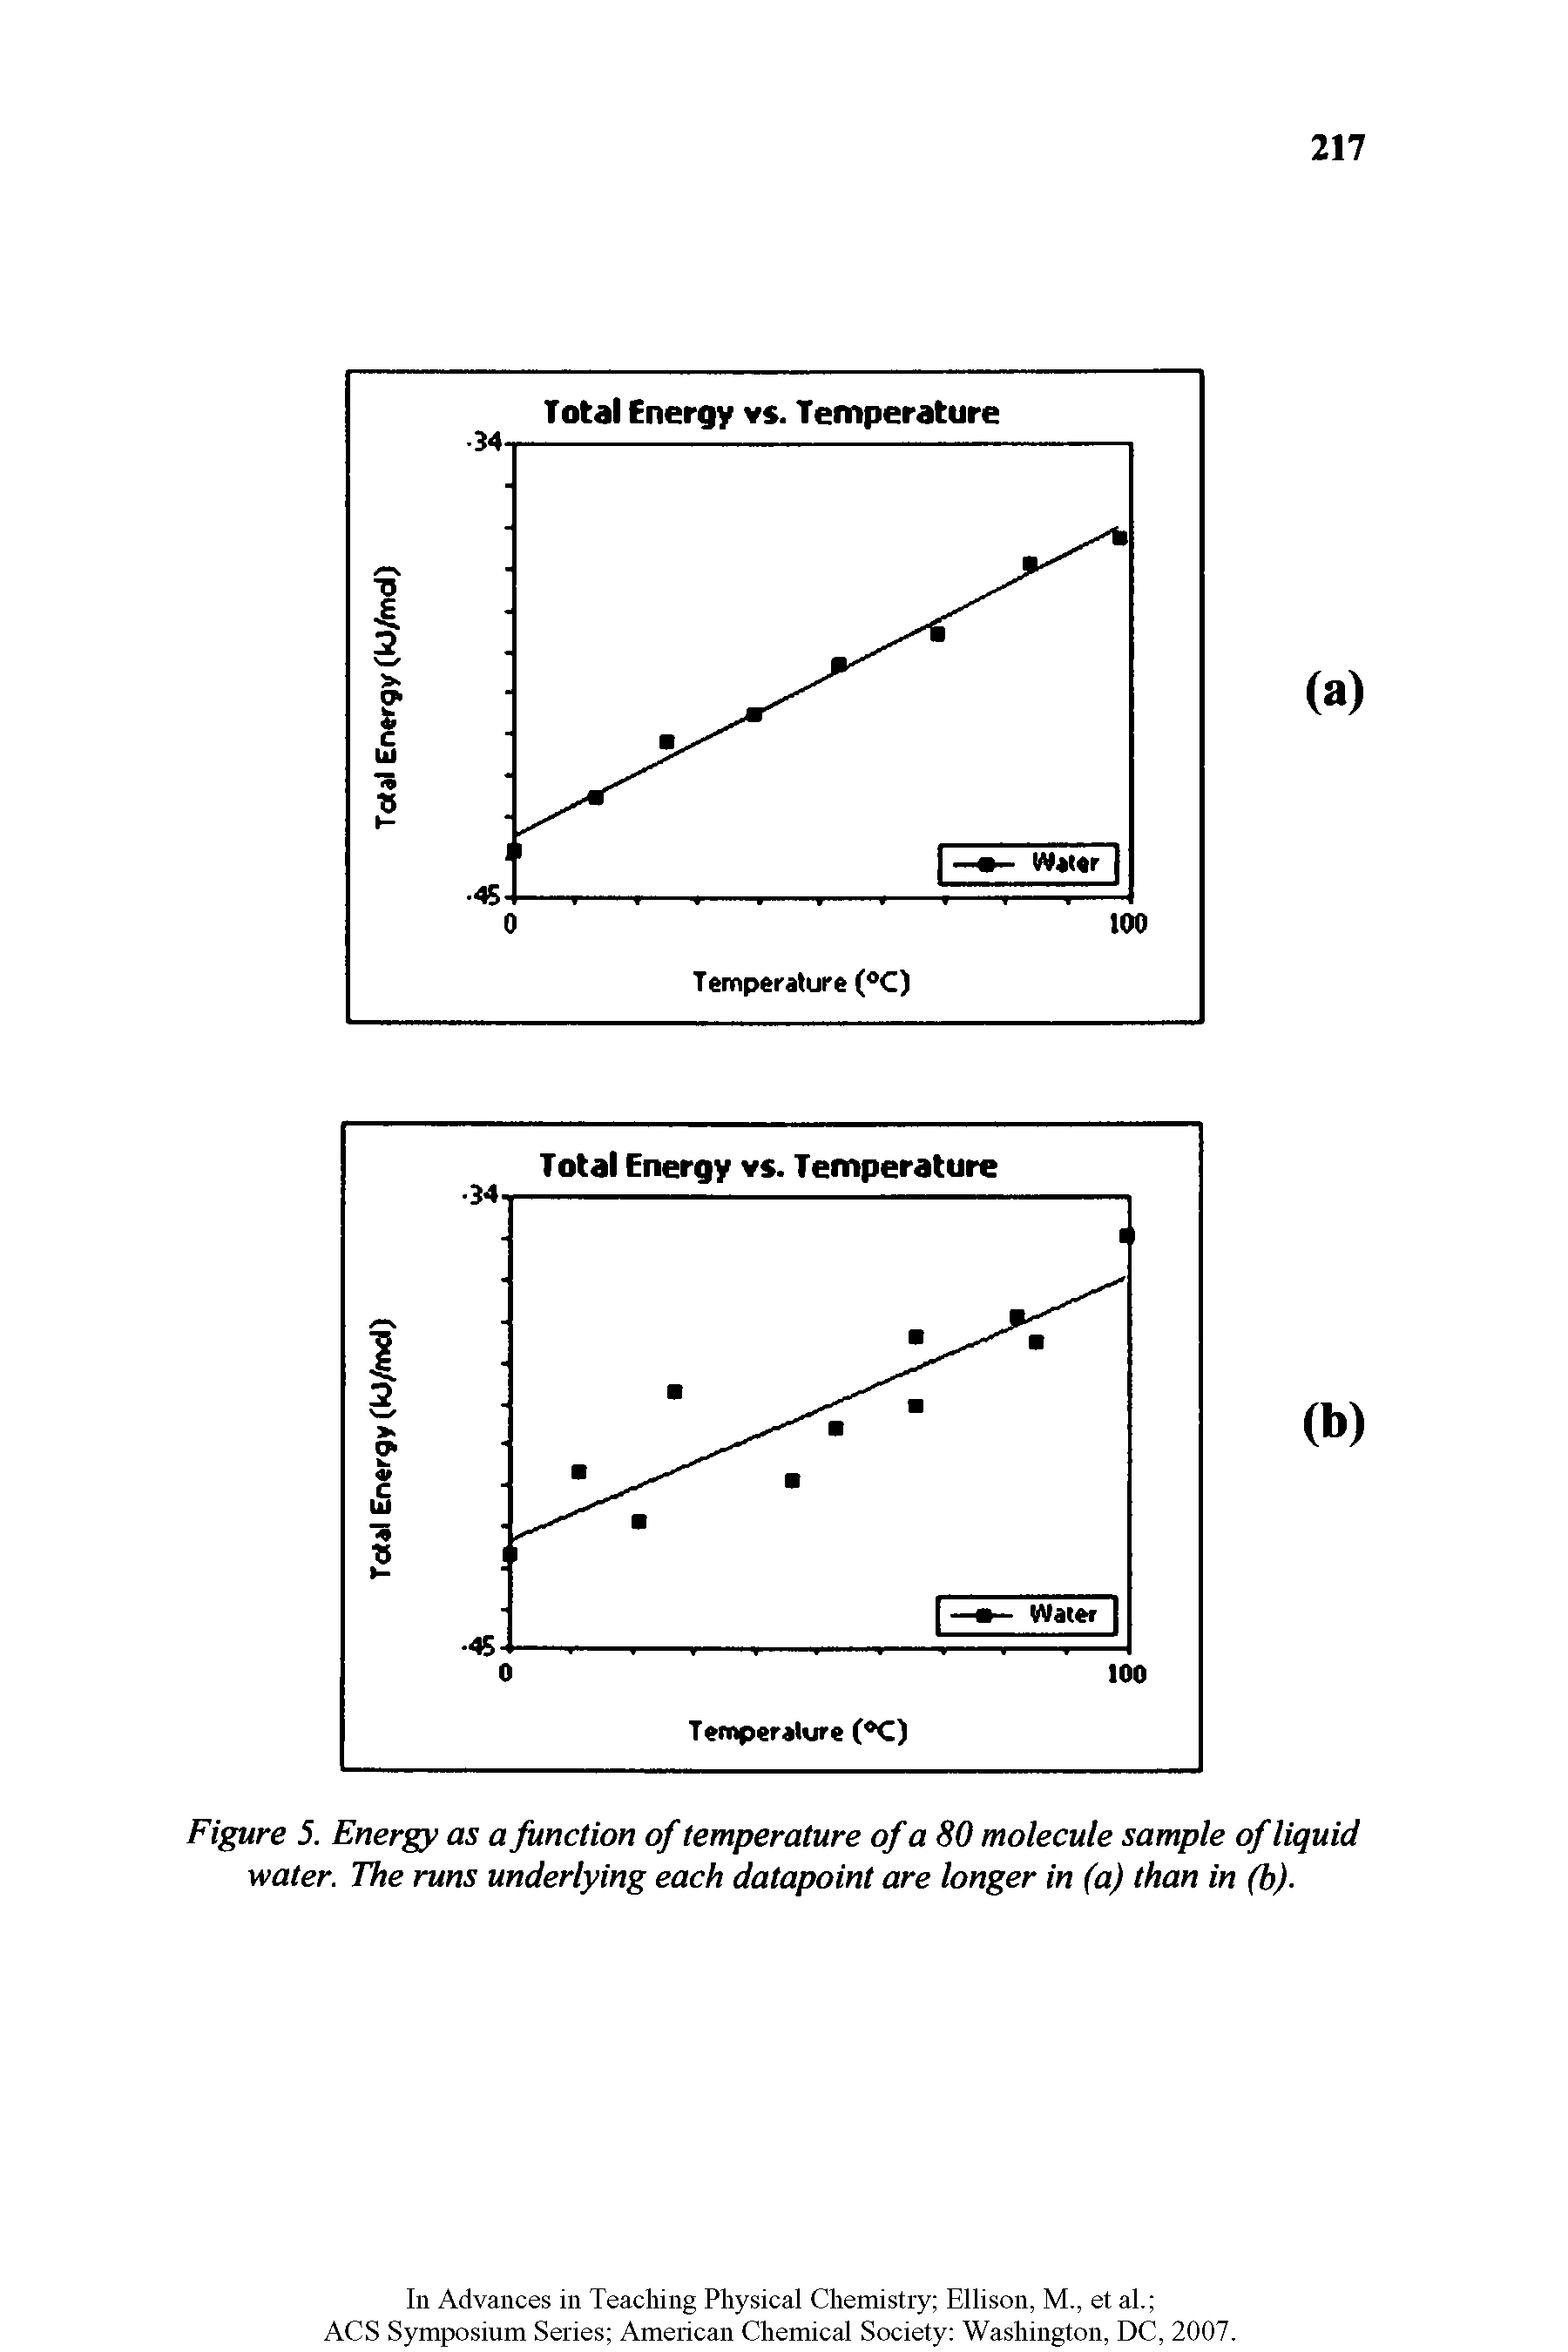 Figure 5. Energy as a Junction of temperature of a 80 molecule sample of liquid water. The runs underlying each datapoint are longer in (a) than in (b).